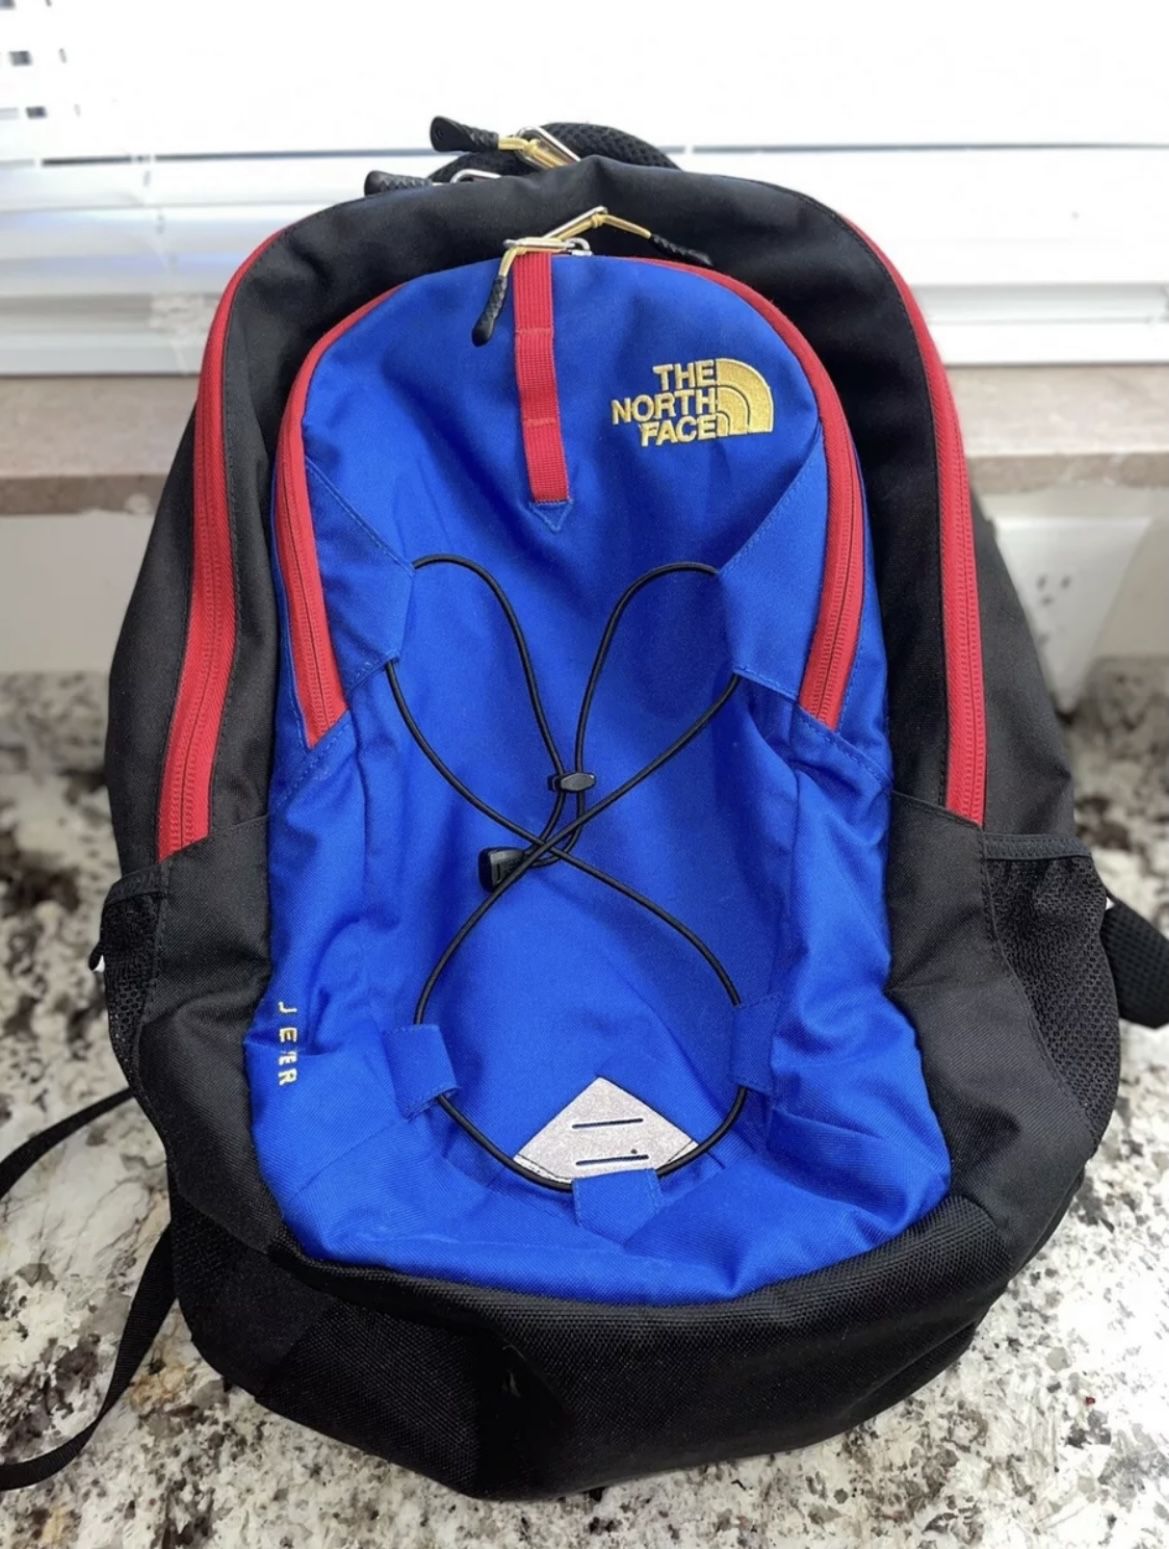 North Face Backpack - Very Good Condition